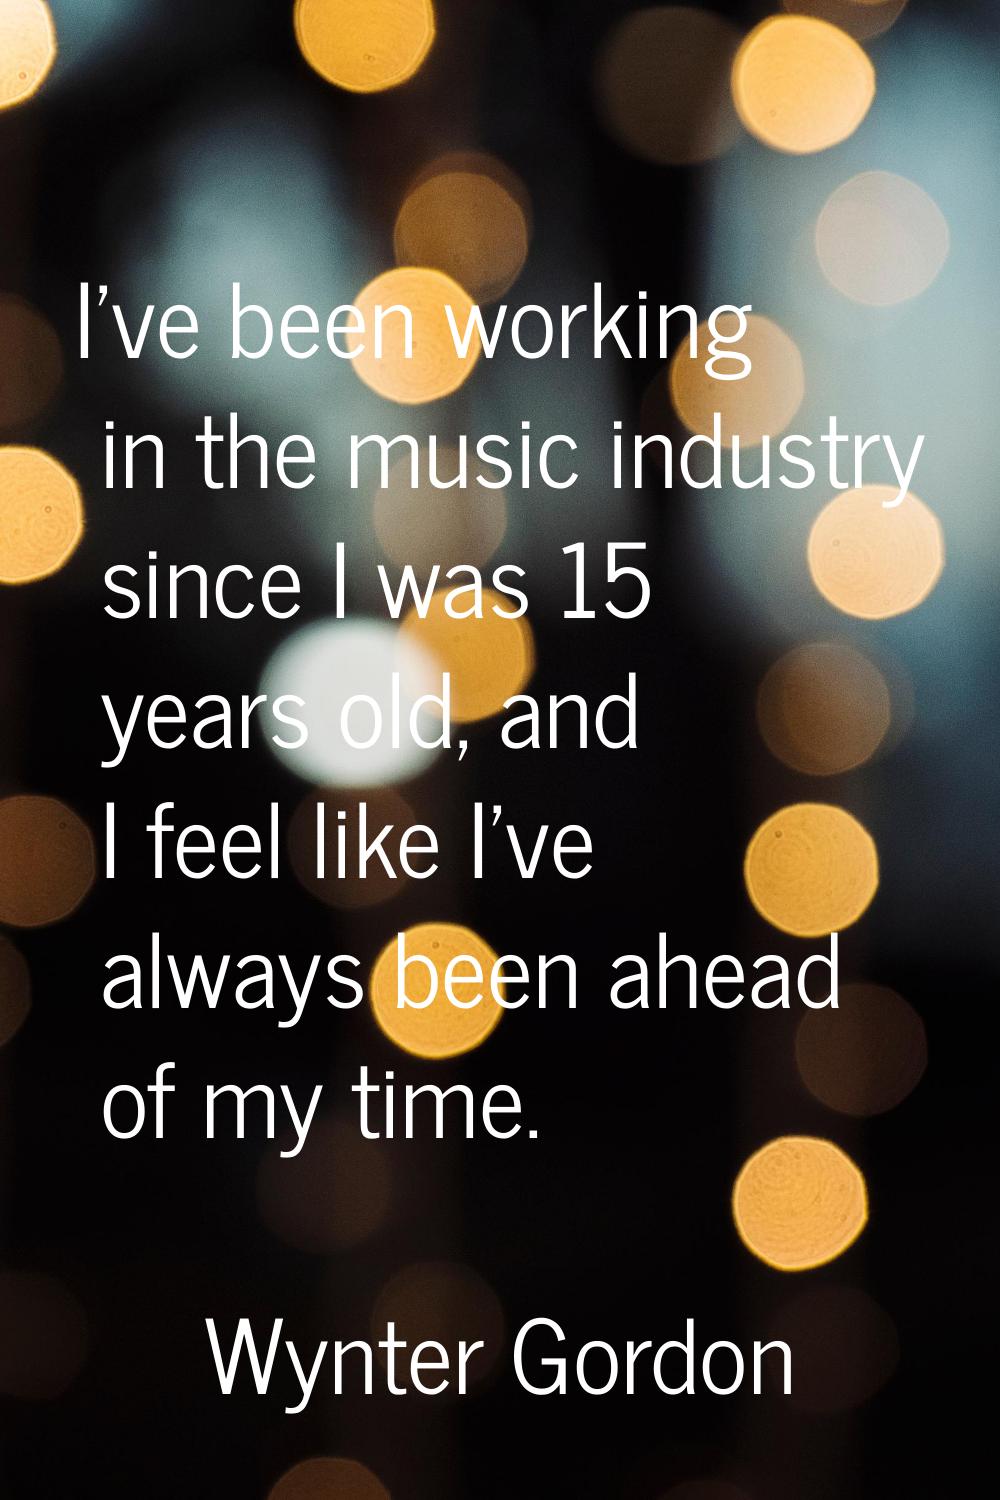 I've been working in the music industry since I was 15 years old, and I feel like I've always been 